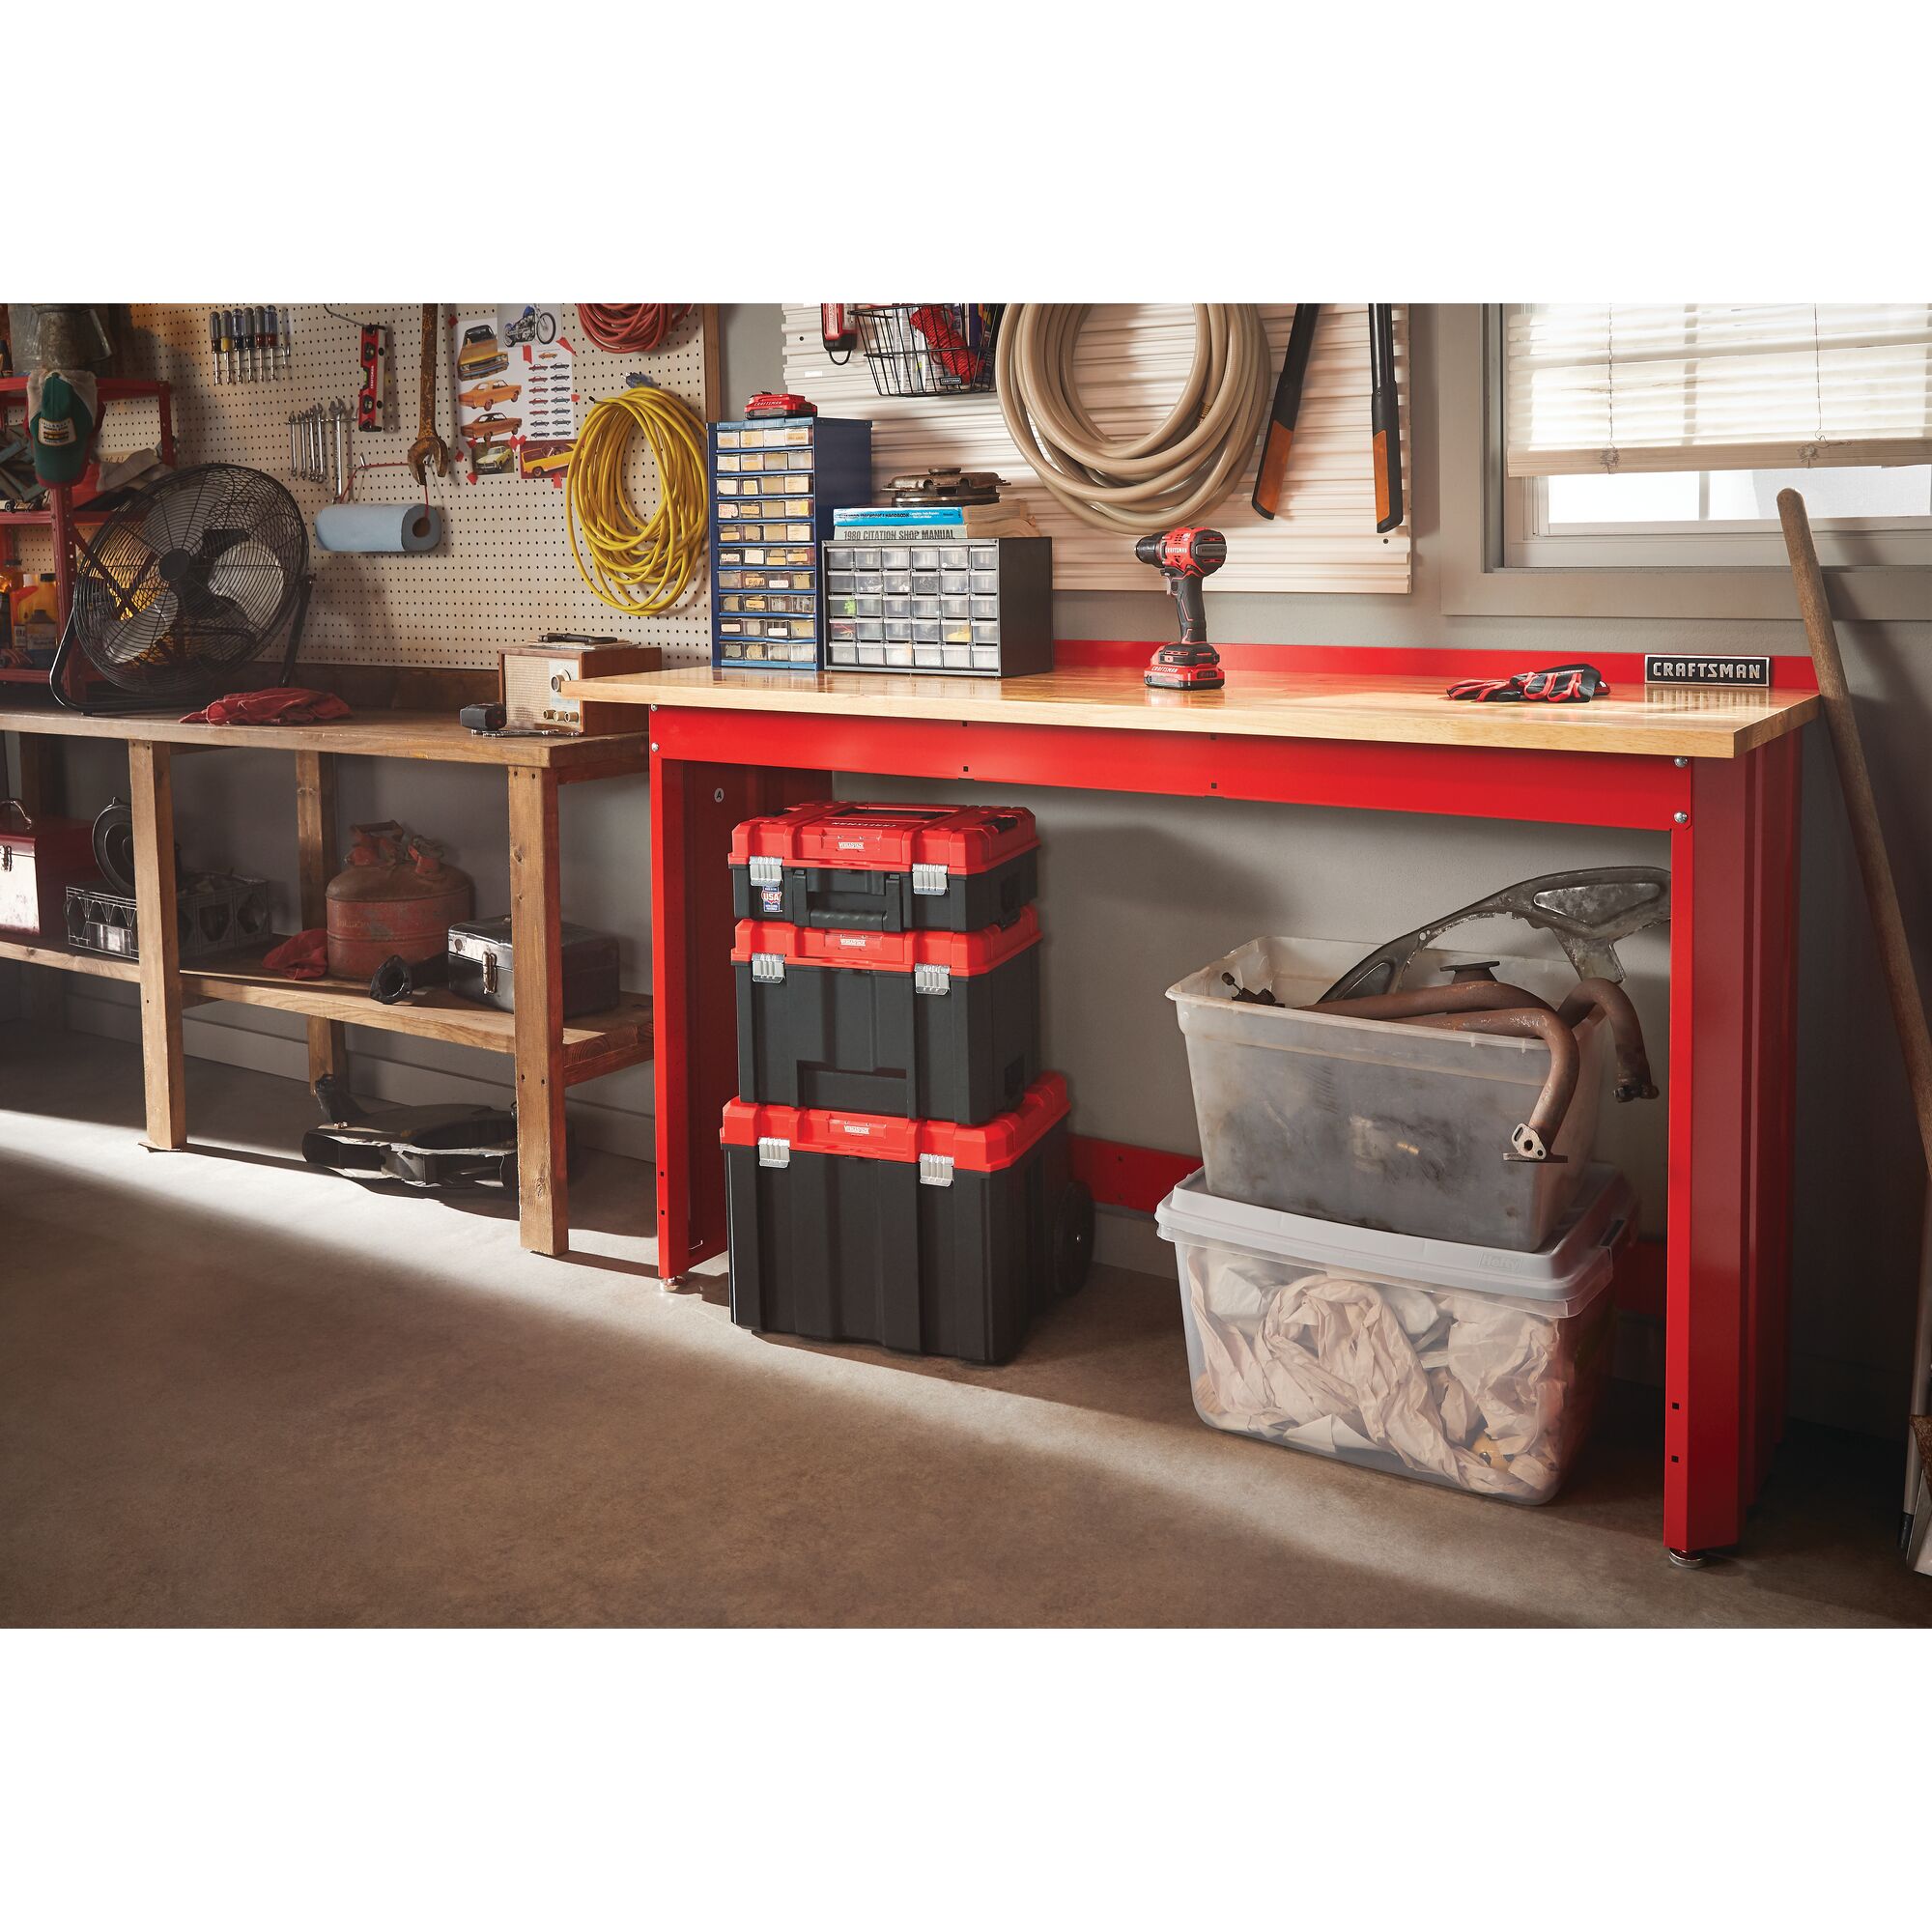 6 foot wide Workbench with Butcher Block Top having tools and storage boxes on its top placed on ground in a garage workshop.